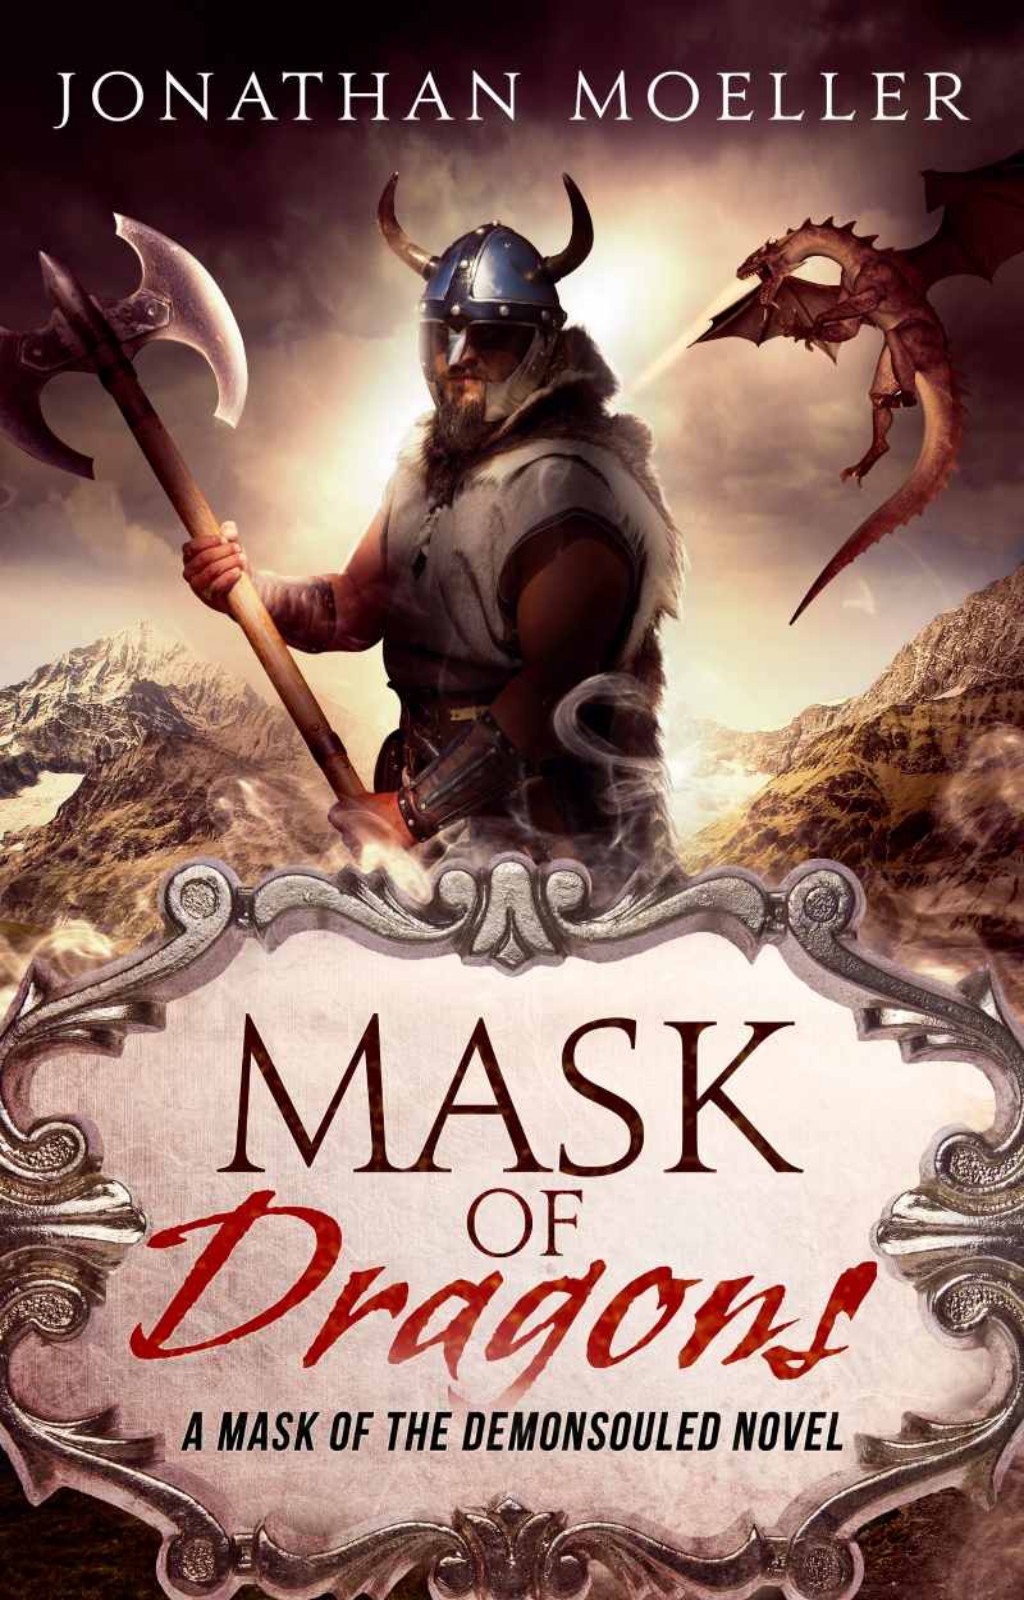 Mask of Dragons by Jonathan Moeller